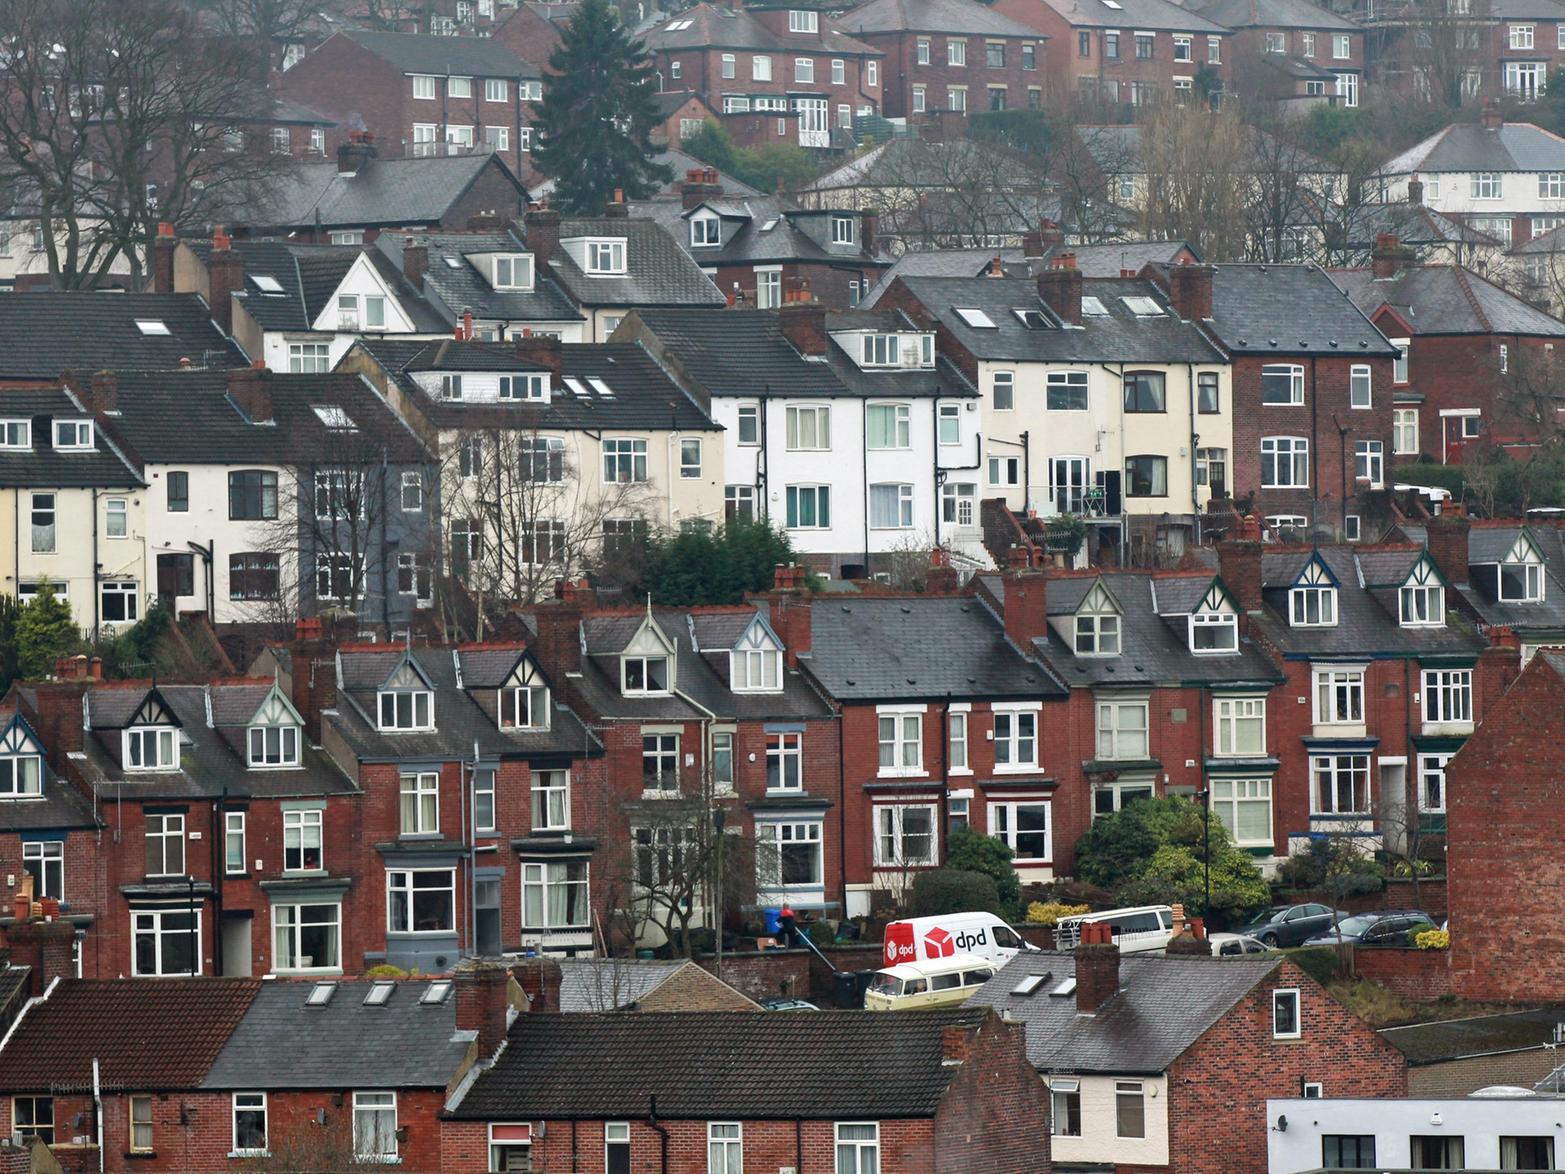 Here is the average cost of a house in every Calder Valley neighbourhood